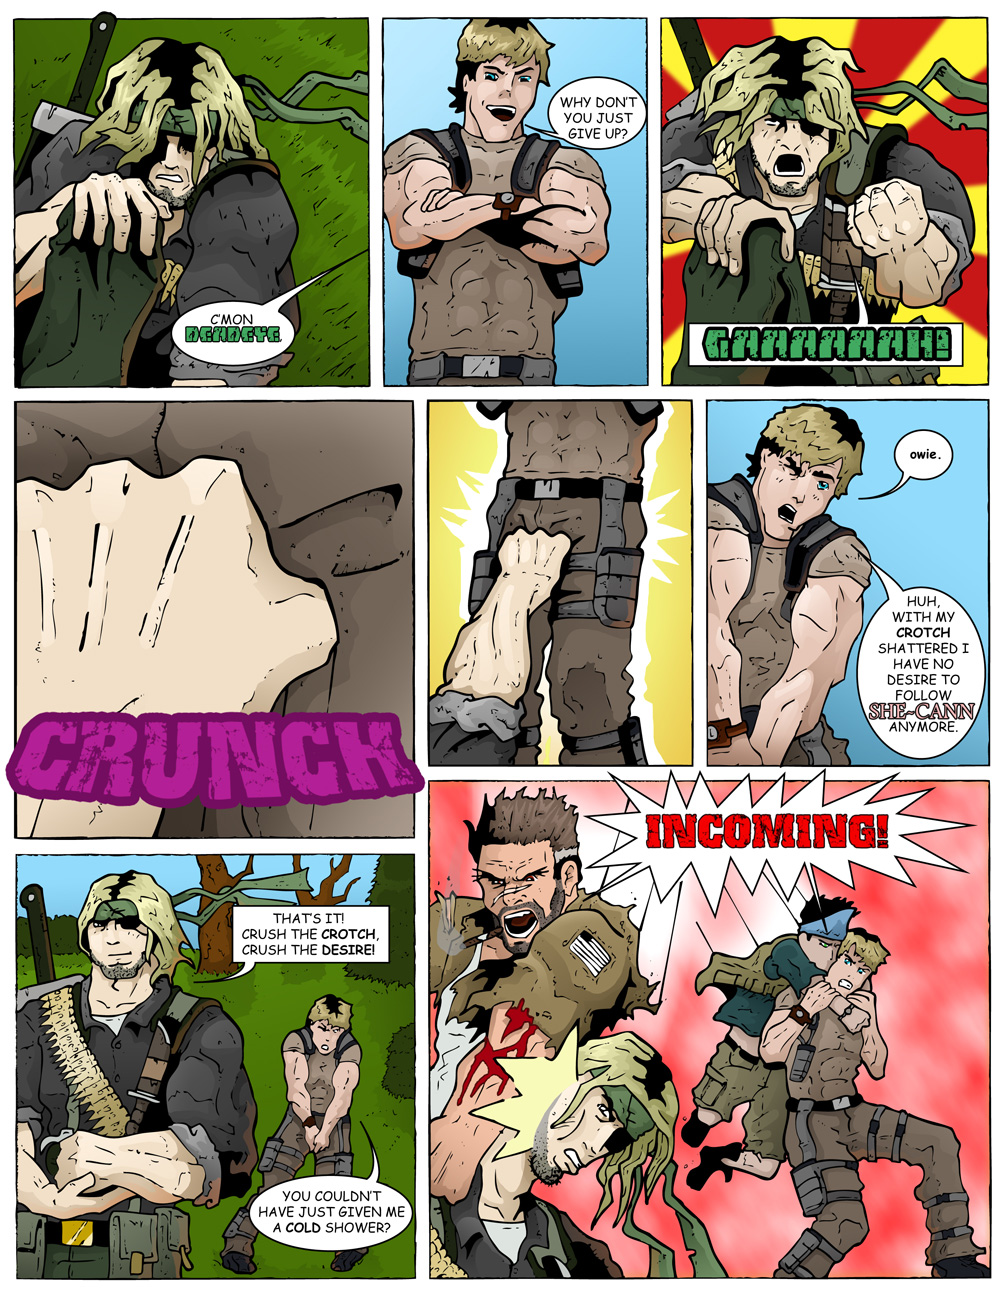 MISSION 002: PAGE 18 “CRUSH THE CROTCH”